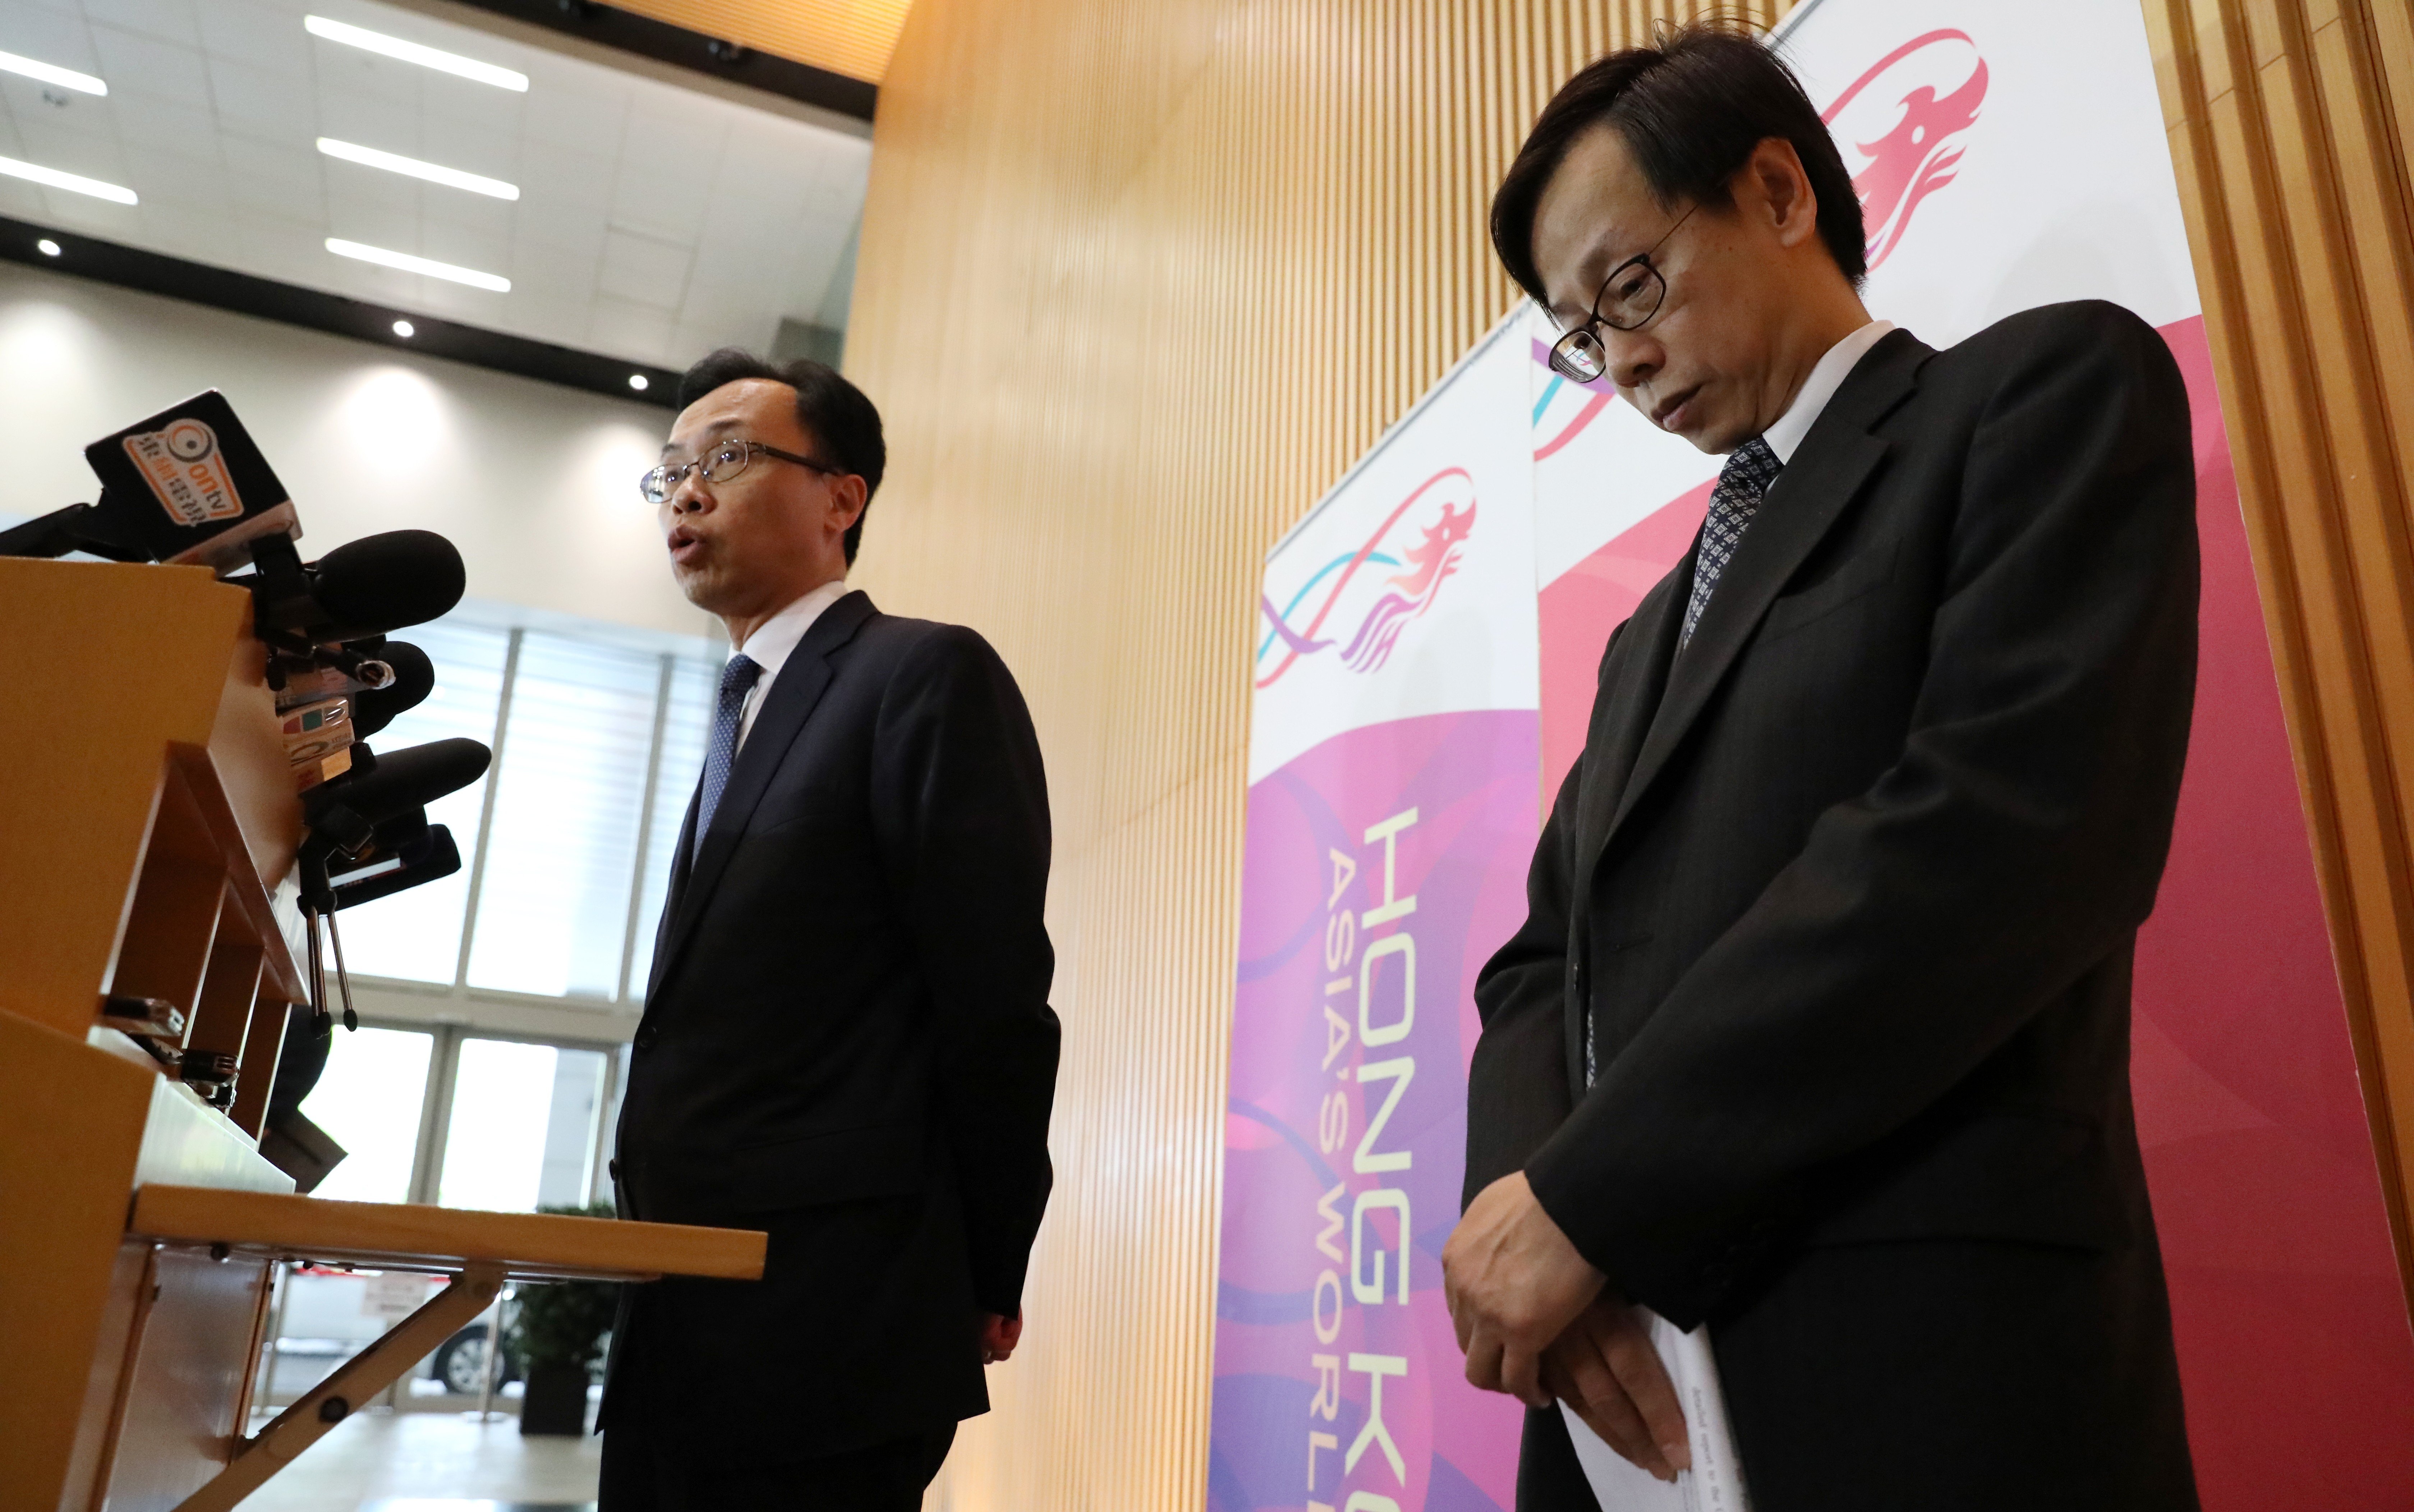 (Left to right) Secretary for Constitutional and Mainland Affairs Patrick Nip and Wong See-man, who was in charge of the Registration and Electoral Office (REO) at a press conference in April, where Wong denied knowing about the missing data. Photo: Nora Tam